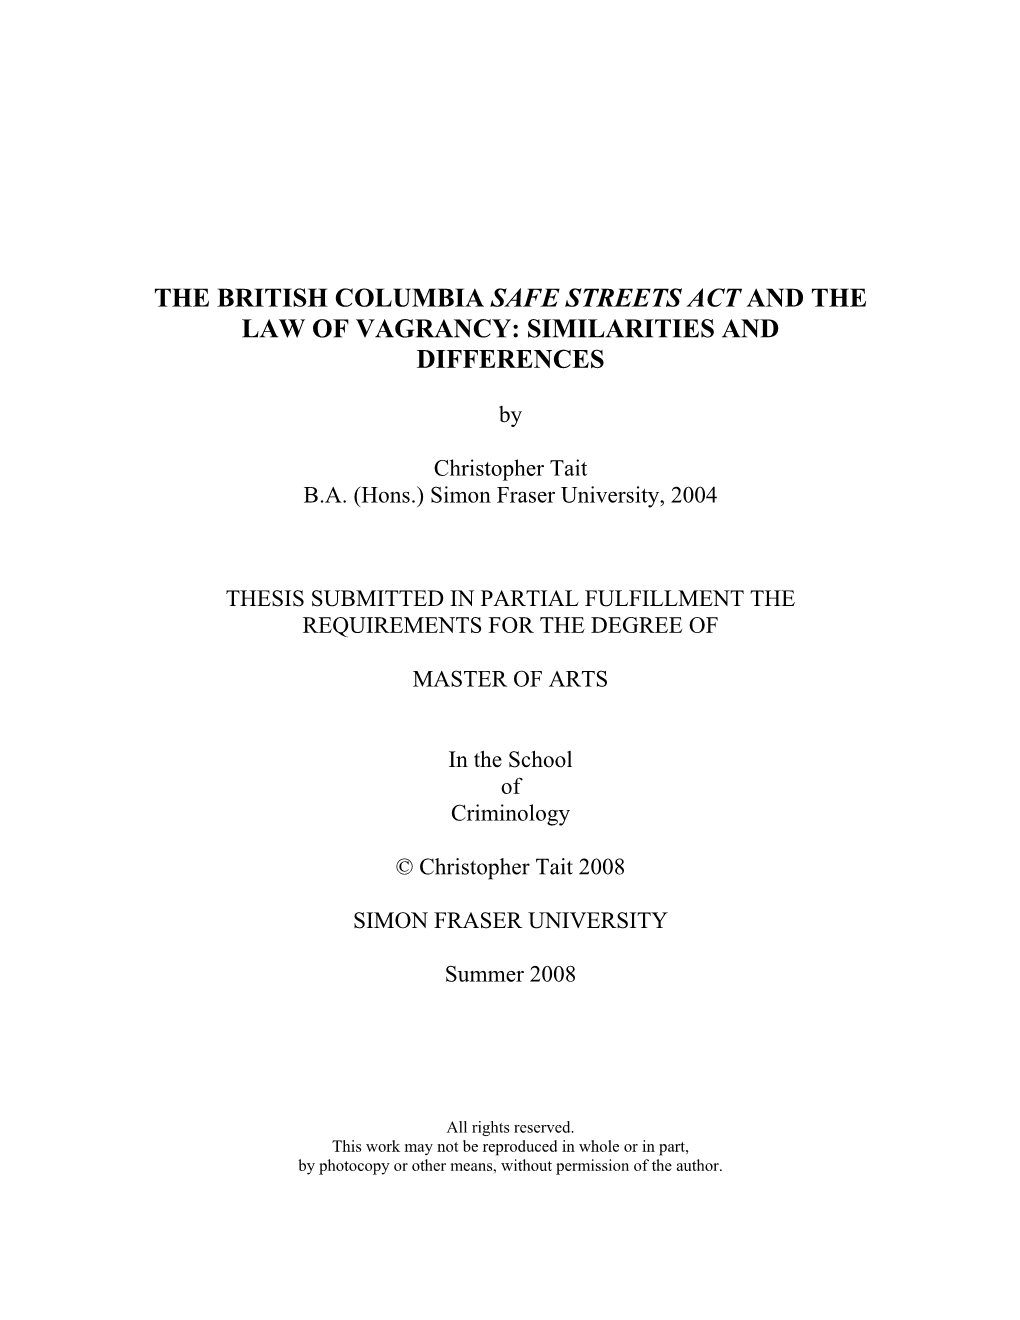 The British Columbia Safe Streets Act and the Law of Vagrancy: Similarities and Differences